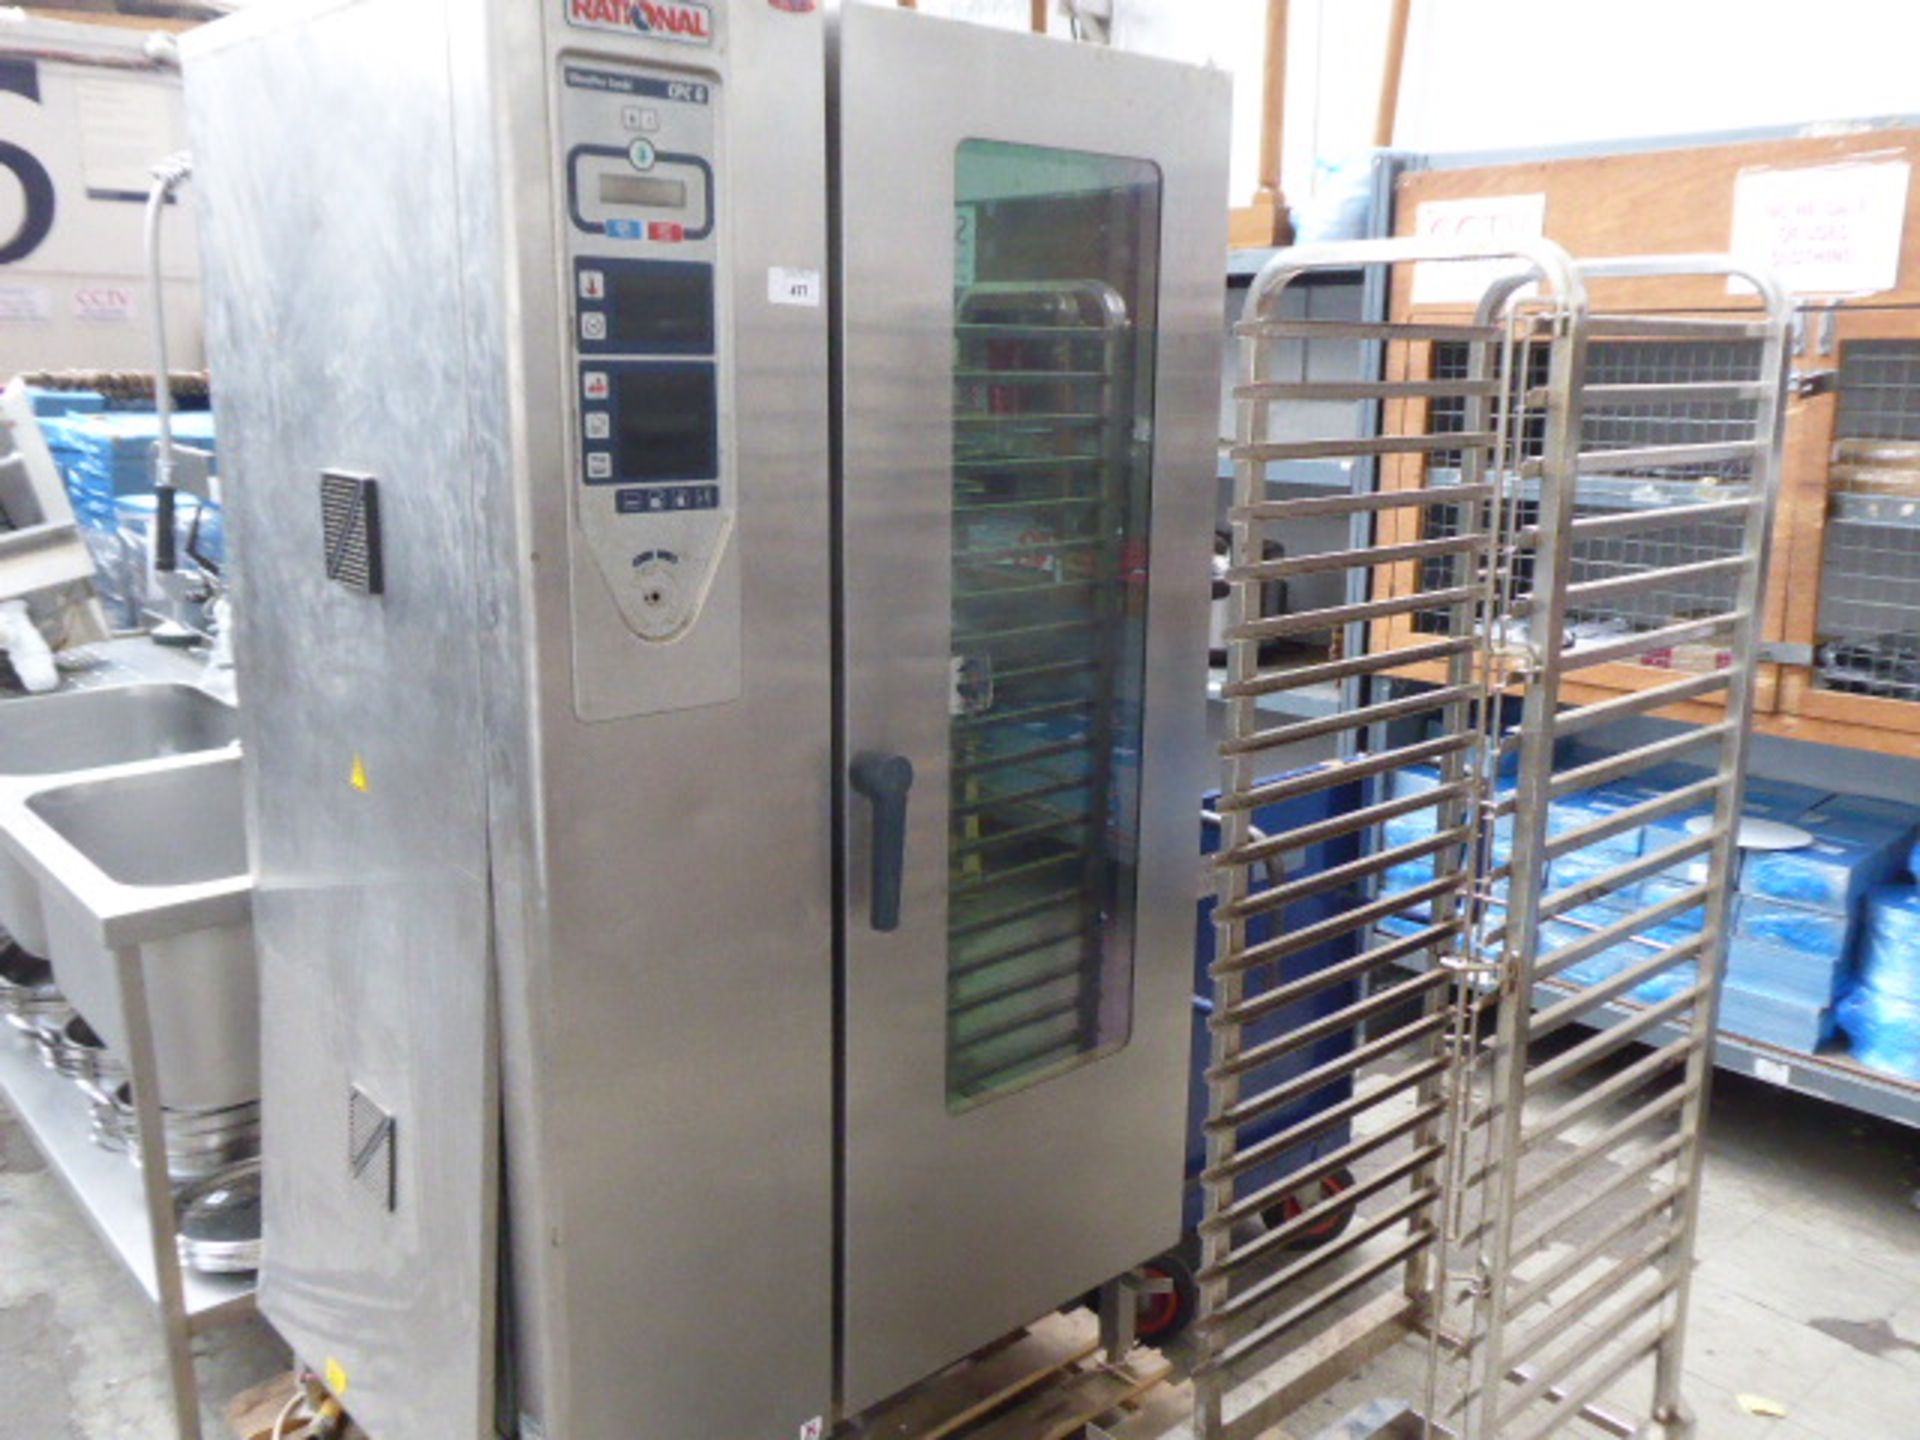 100cm gas Rational Climba Plus CPCG 20 grid combination oven with an associated 20 grid walk in